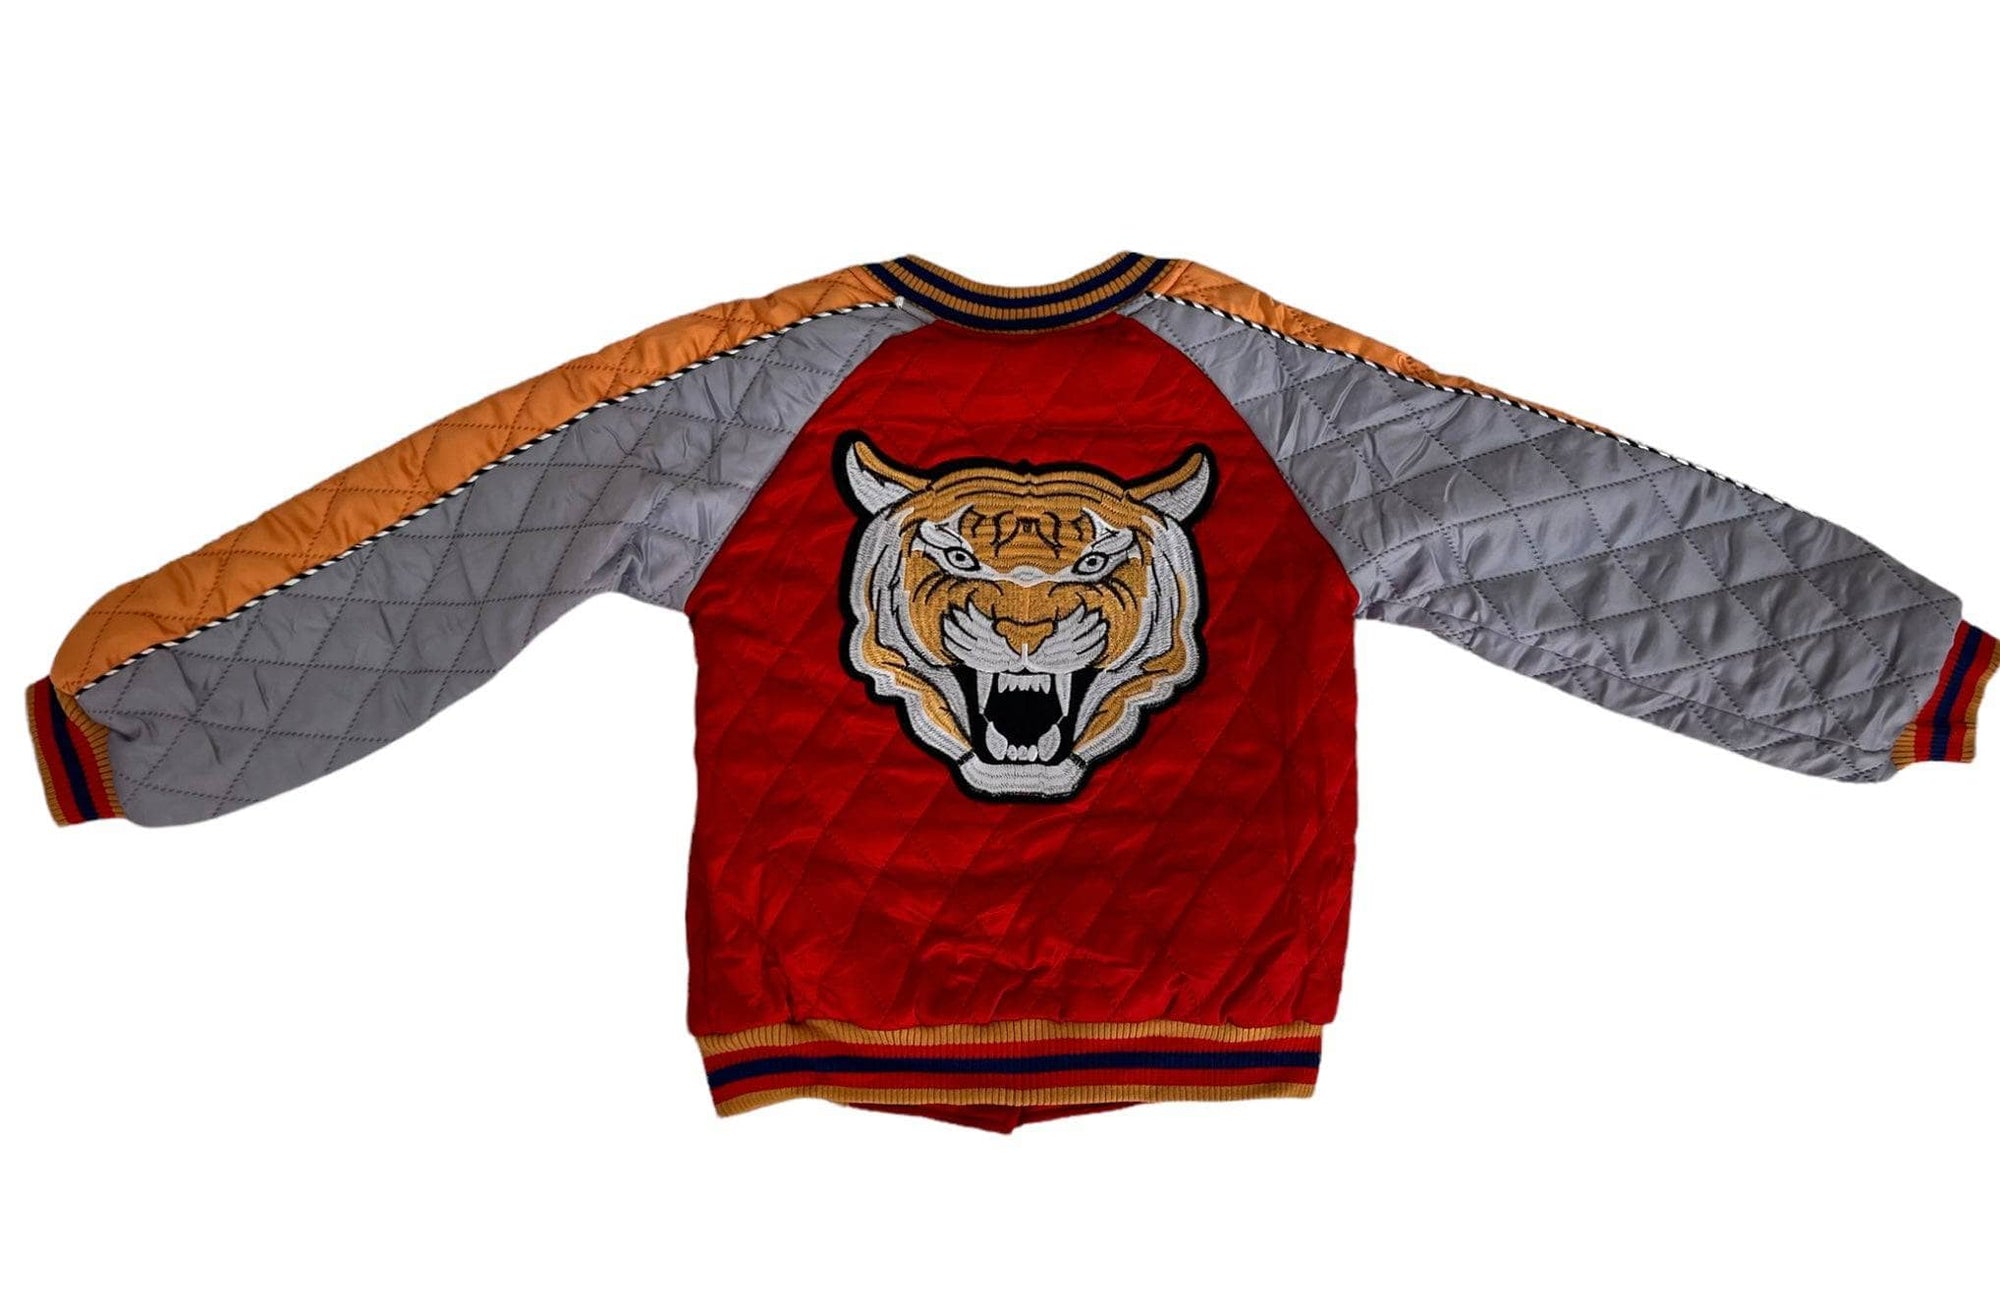 100% Authentic GUCCI Tiger Wool Bomber Jacket Size: L